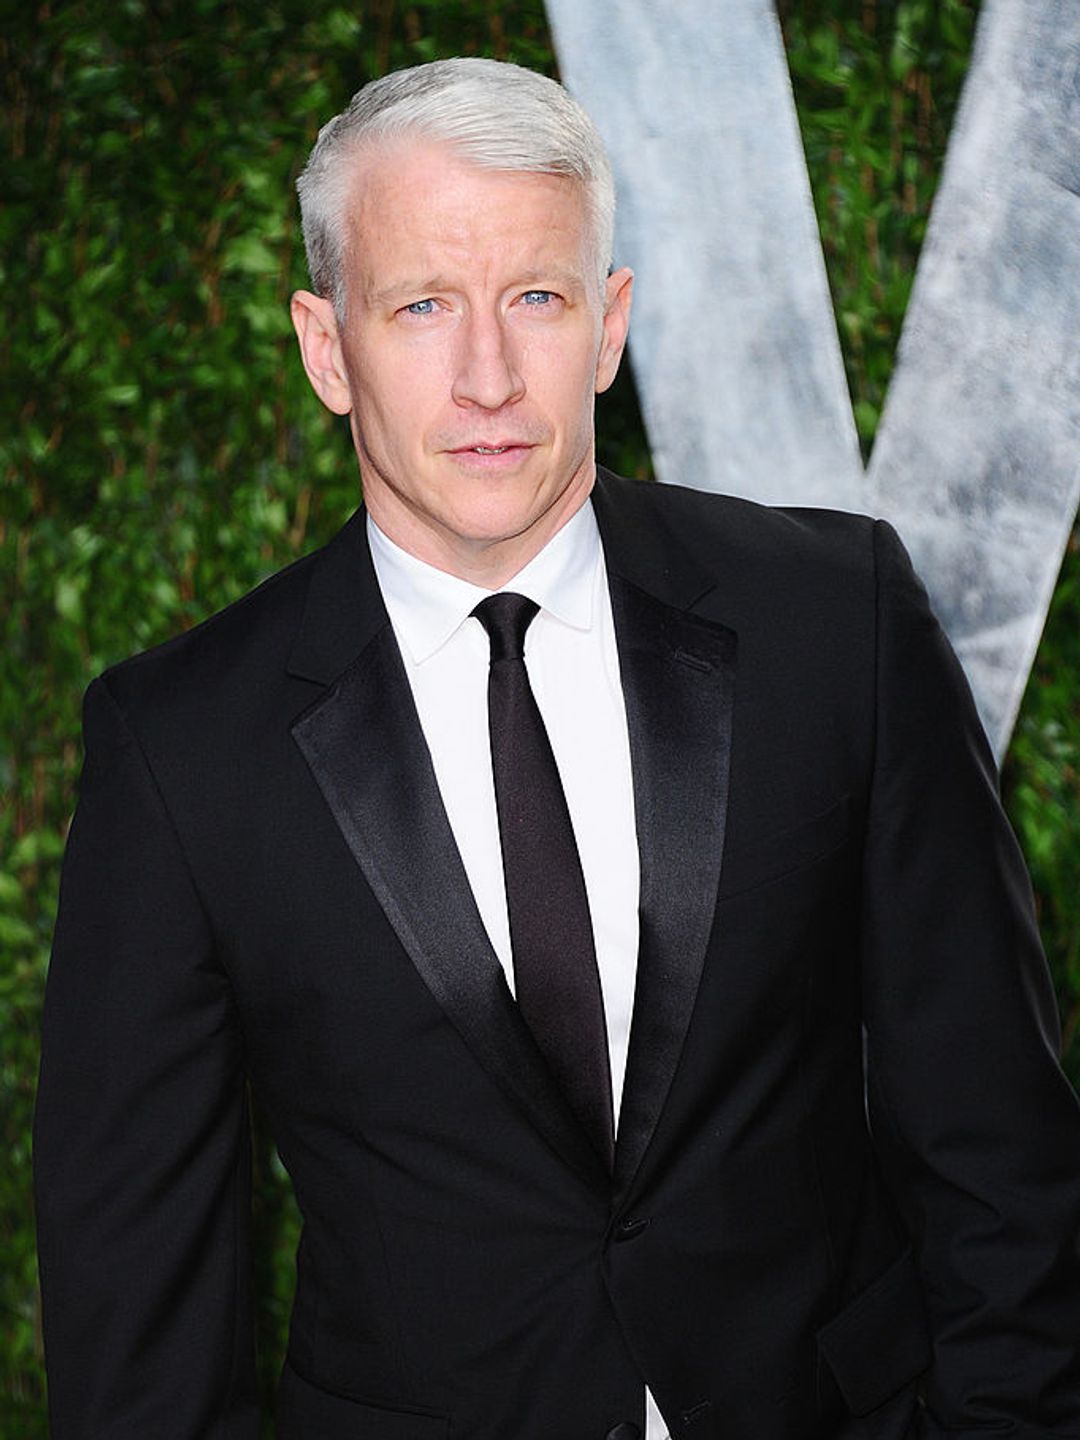 Anderson Cooper wearing a black suit